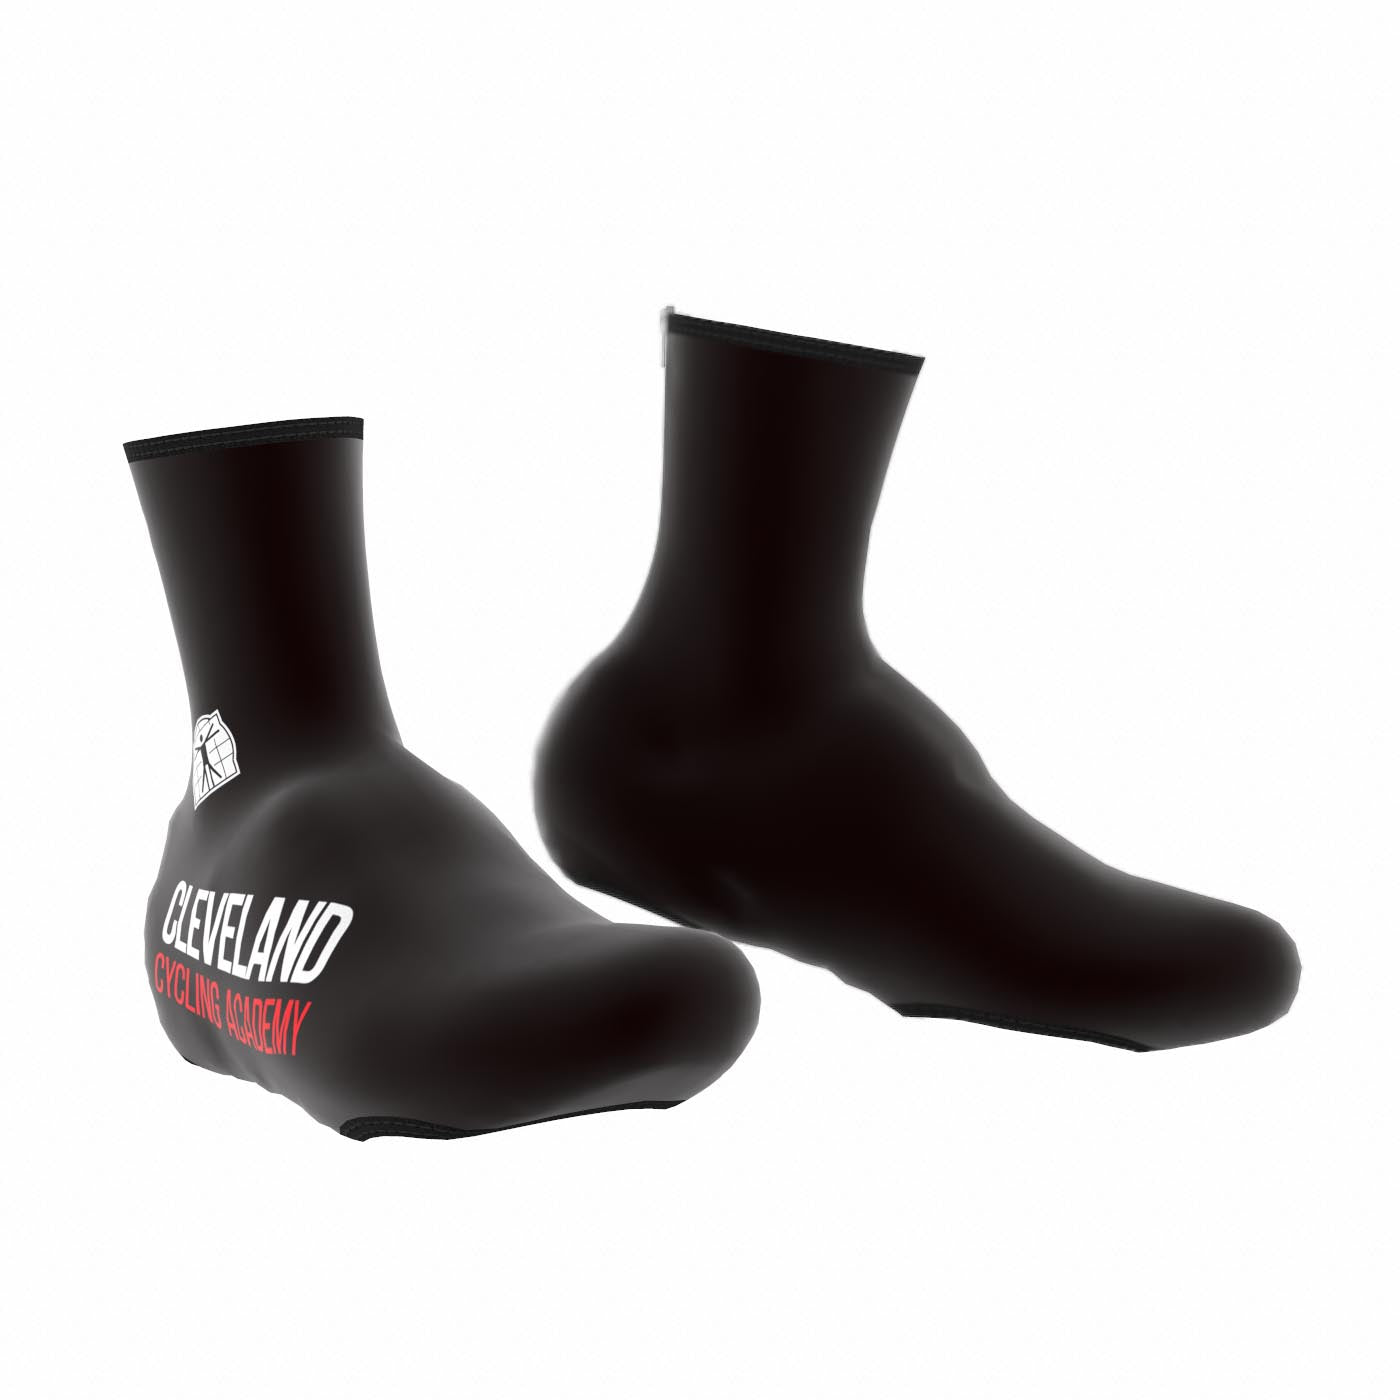 Tempest Full Protect Winter Shoe Covers - Unisex